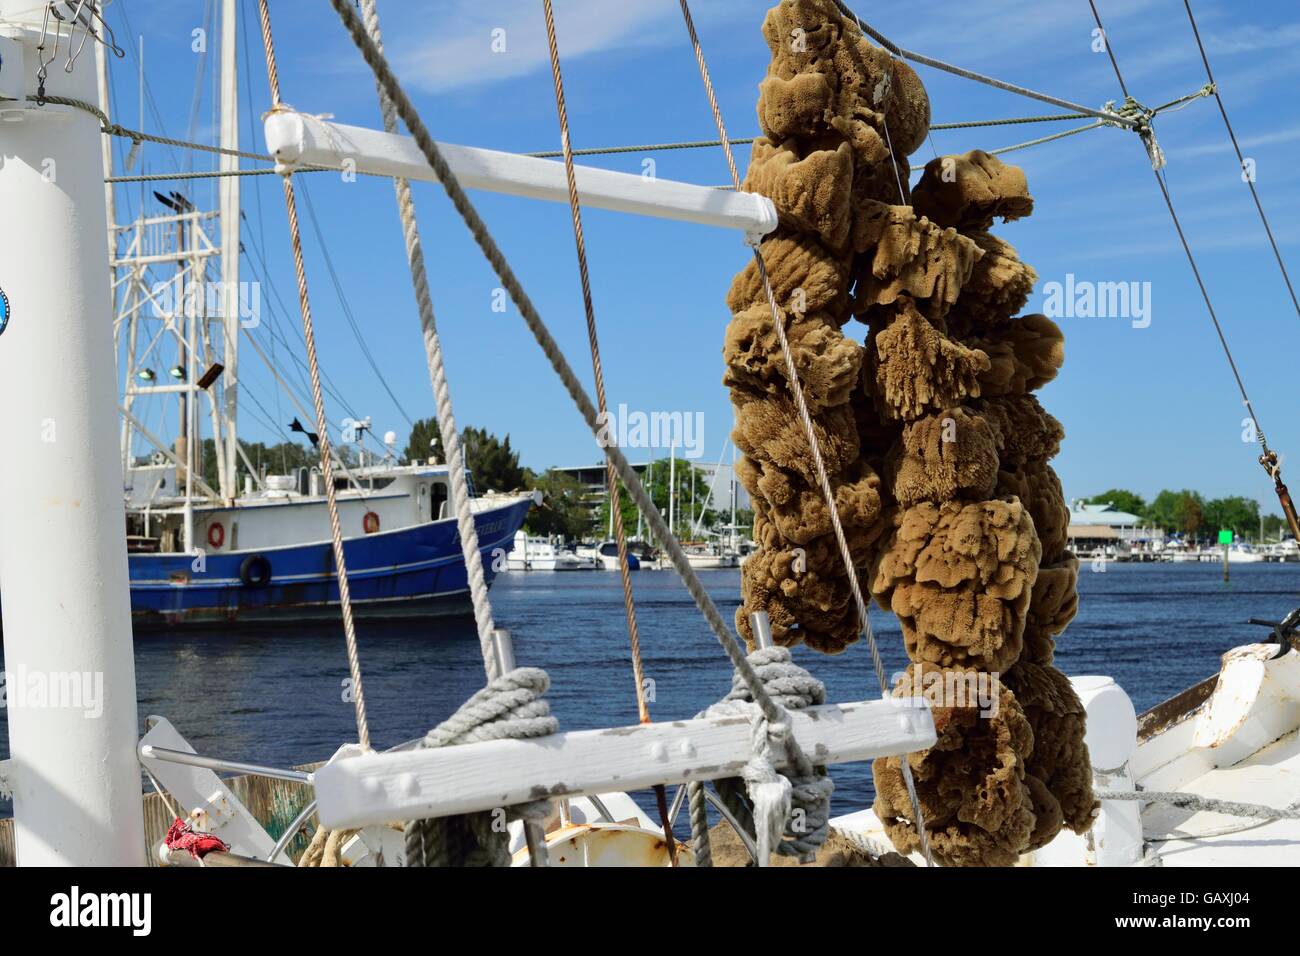 Worlds Finest Sponges hanging from a boat at the docks in a Greek Community in Tarpon Springs, Florida. Stock Photo